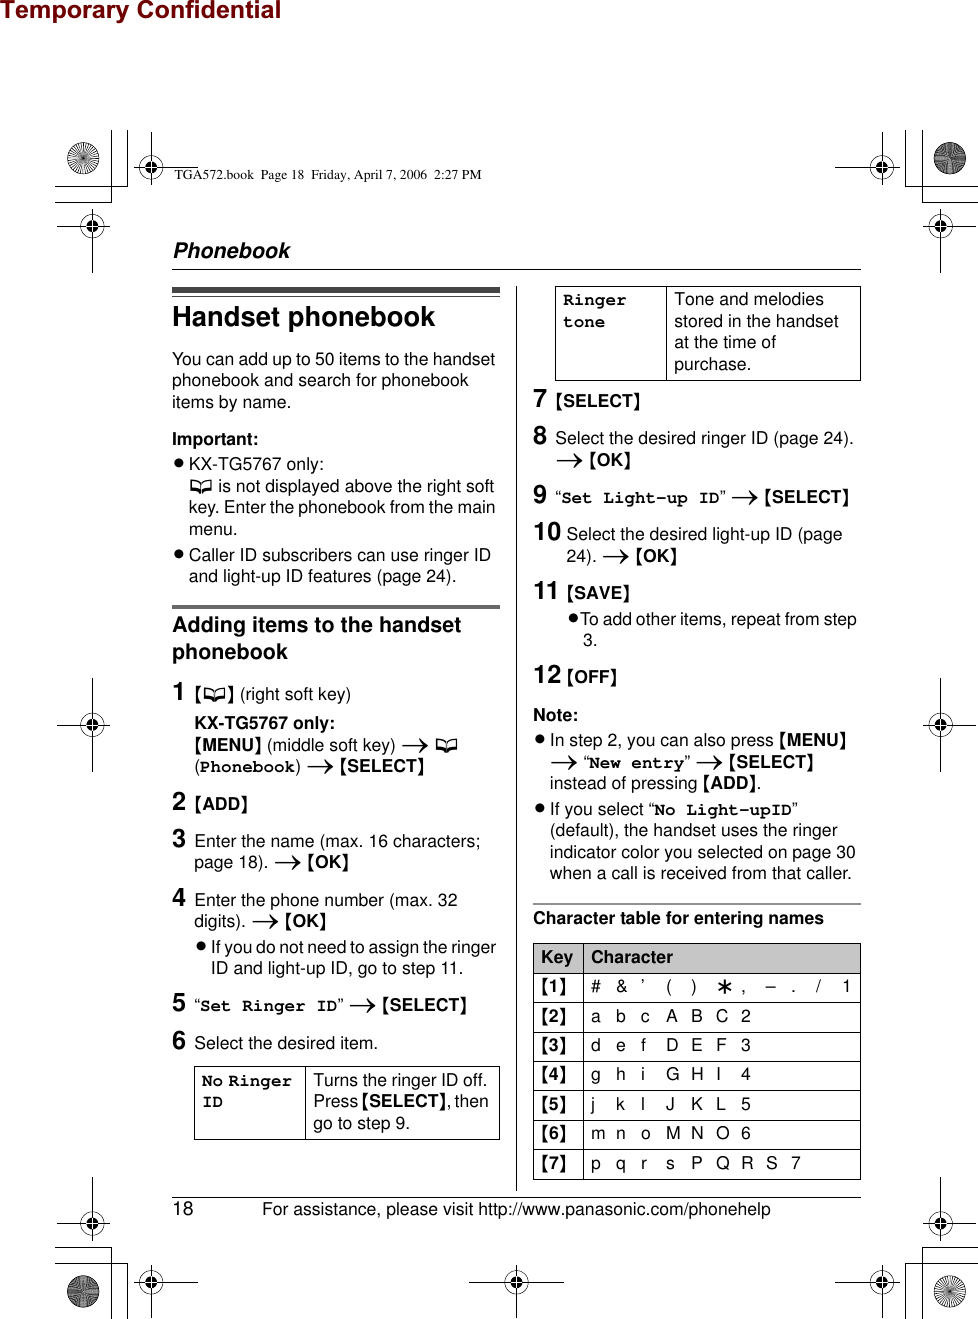 Temporary ConfidentialPhonebook18 For assistance, please visit http://www.panasonic.com/phonehelpHandset phonebookYou can add up to 50 items to the handset phonebook and search for phonebook items by name.Important:LKX-TG5767 only:C is not displayed above the right soft key. Enter the phonebook from the main menu.LCaller ID subscribers can use ringer ID and light-up ID features (page 24).Adding items to the handset phonebook1{C} (right soft key)KX-TG5767 only:{MENU} (middle soft key) i C (Phonebook) i {SELECT}2{ADD}3Enter the name (max. 16 characters; page 18). i {OK}4Enter the phone number (max. 32 digits). i {OK}LIf you do not need to assign the ringer ID and light-up ID, go to step 11.5“Set Ringer ID” i {SELECT}6Select the desired item.7{SELECT}8Select the desired ringer ID (page 24). i {OK}9“Set Light-up ID” i {SELECT}10 Select the desired light-up ID (page 24). i {OK}11 {SAVE}LTo add other items, repeat from step 3.12 {OFF}Note:LIn step 2, you can also press {MENU} i “New entry” i {SELECT} instead of pressing {ADD}.LIf you select “No Light-upID” (default), the handset uses the ringer indicator color you selected on page 30 when a call is received from that caller.Character table for entering namesNo Ringer IDTurns the ringer ID off. Press {SELECT}, then go to step 9.Ringer toneTone and melodies stored in the handset at the time of purchase.Key Character{1}#&amp;’ ( ) ;,–./1{2}abcABC2{3}def DEF3{4}ghi GHI 4{5}jklJKL5{6}mn o MNO6{7}pqr sPQRS7TGA572.book  Page 18  Friday, April 7, 2006  2:27 PM